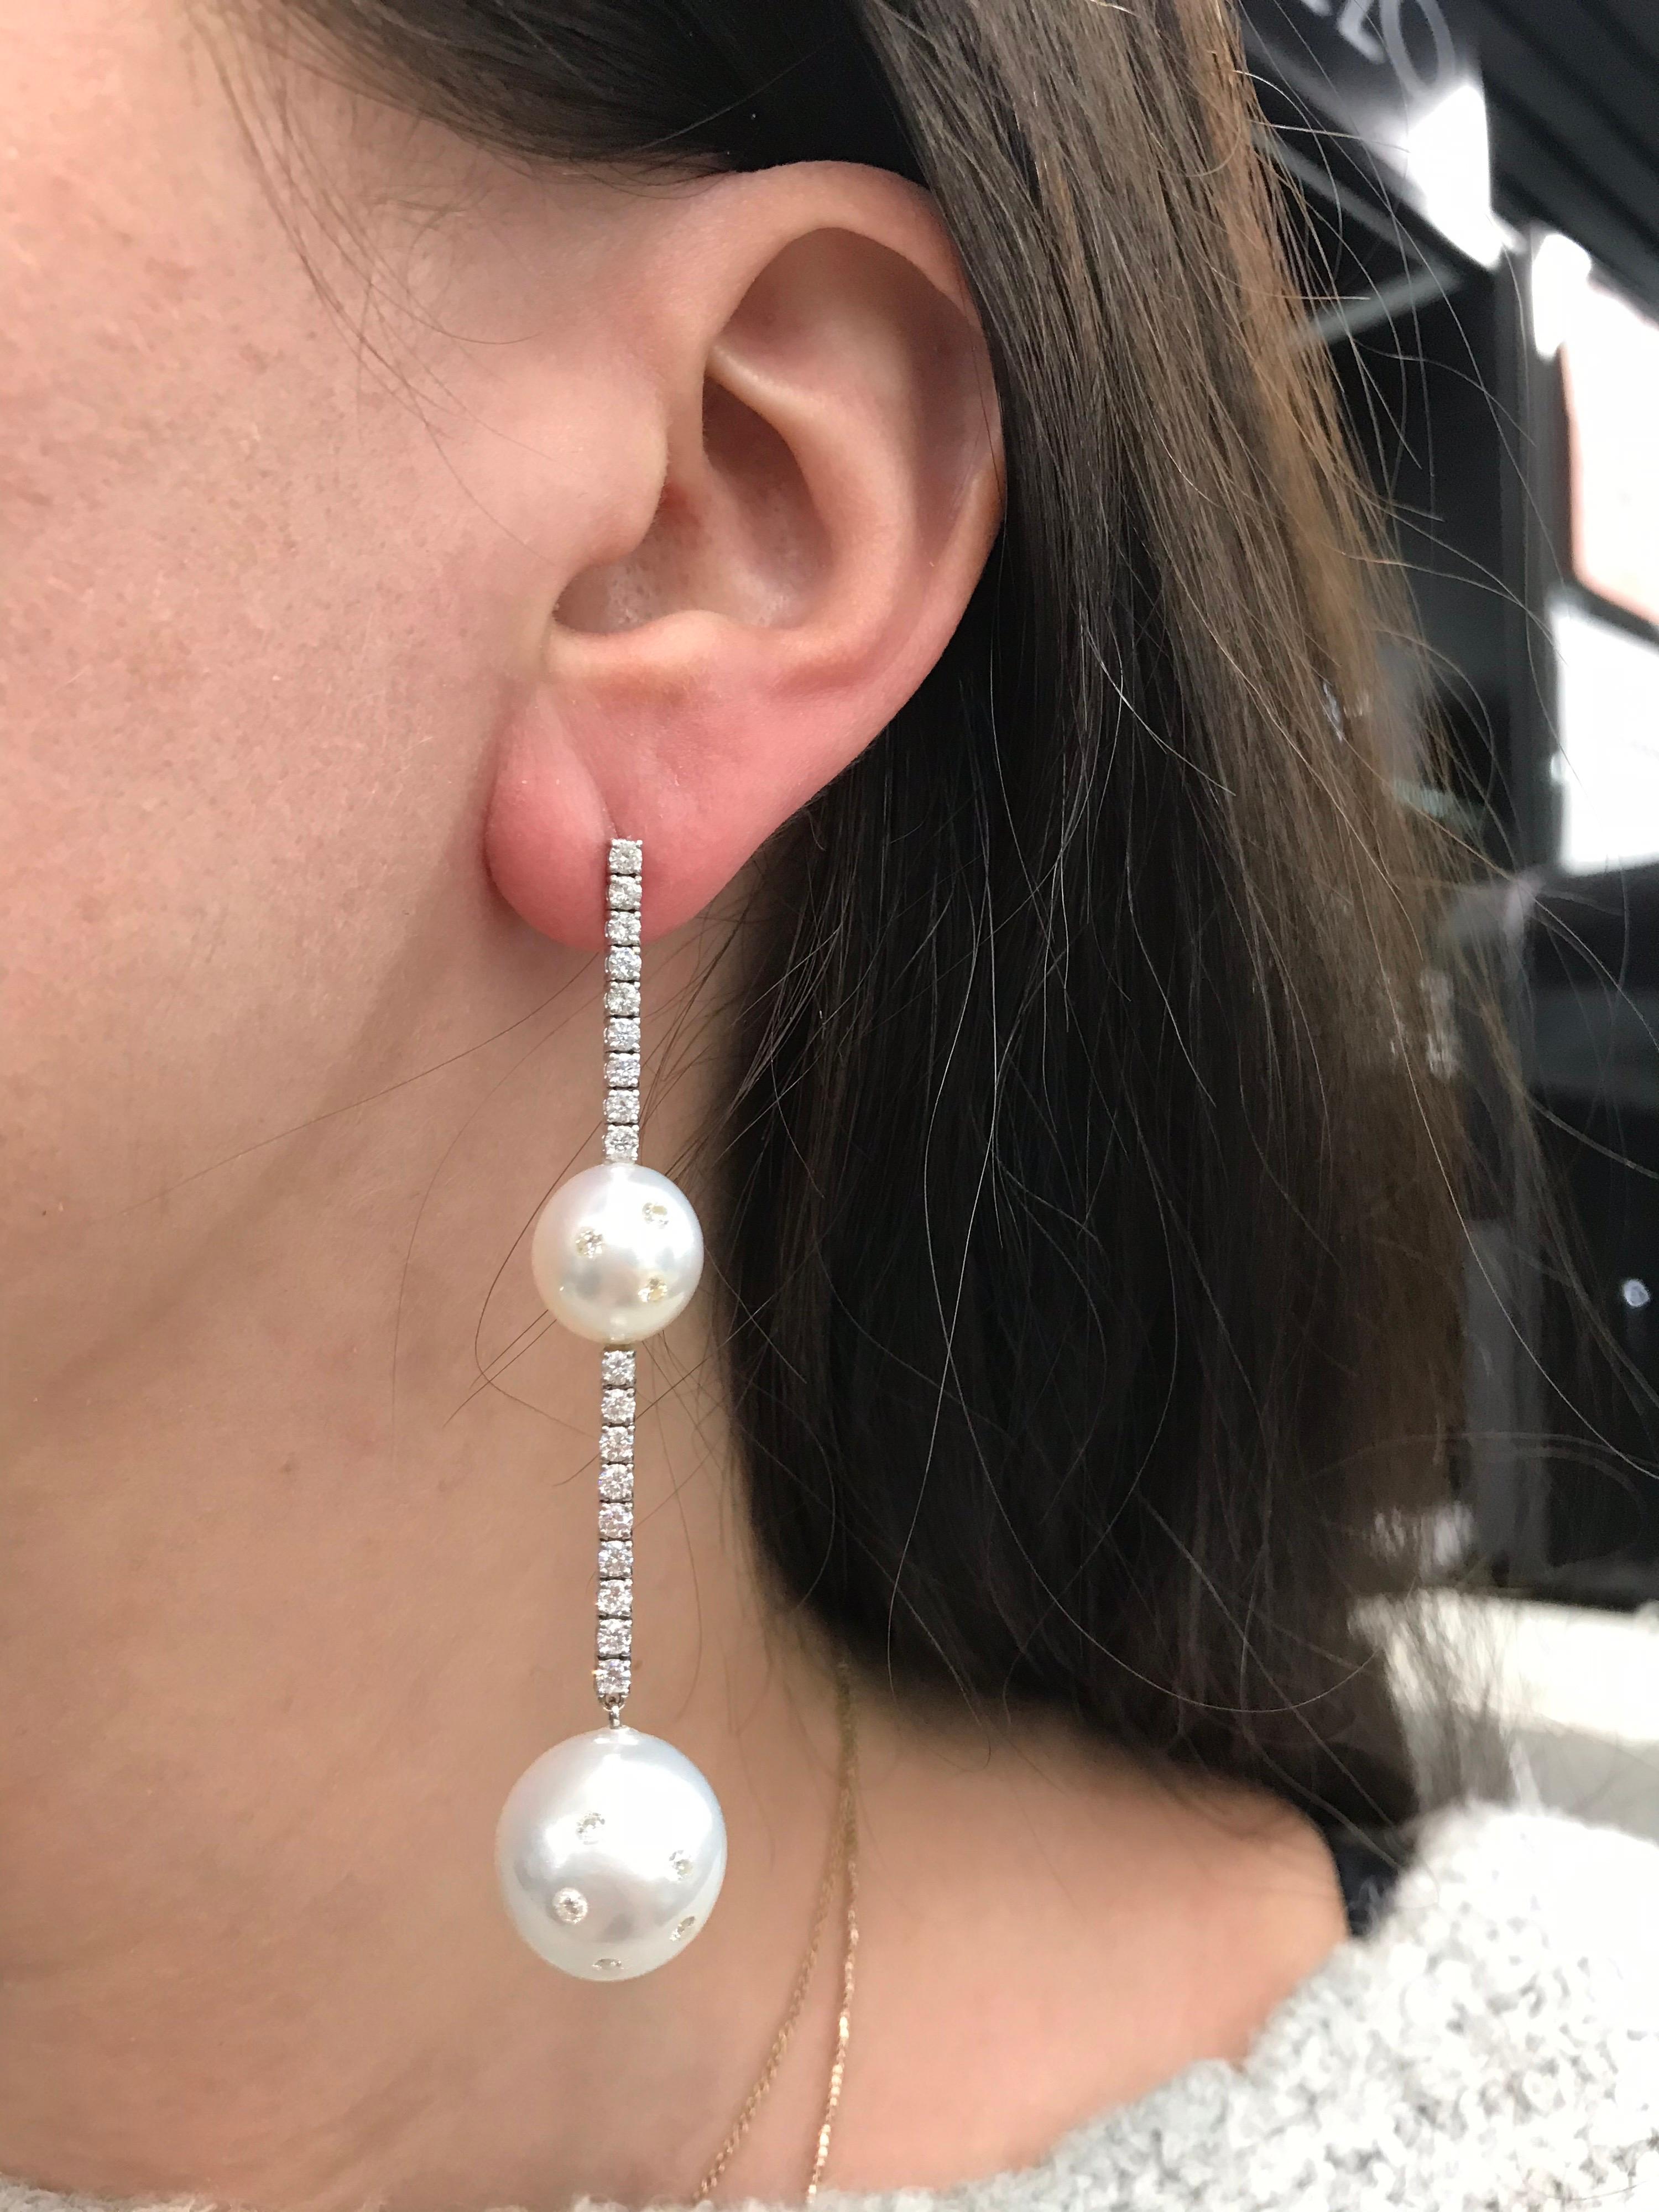 18K Rose Gold drop earrings featuring South Sea Pearls measuring 11-14 mm with 36 round brilliants weighing 1.81 carats.
Color G-H
Clarity SI